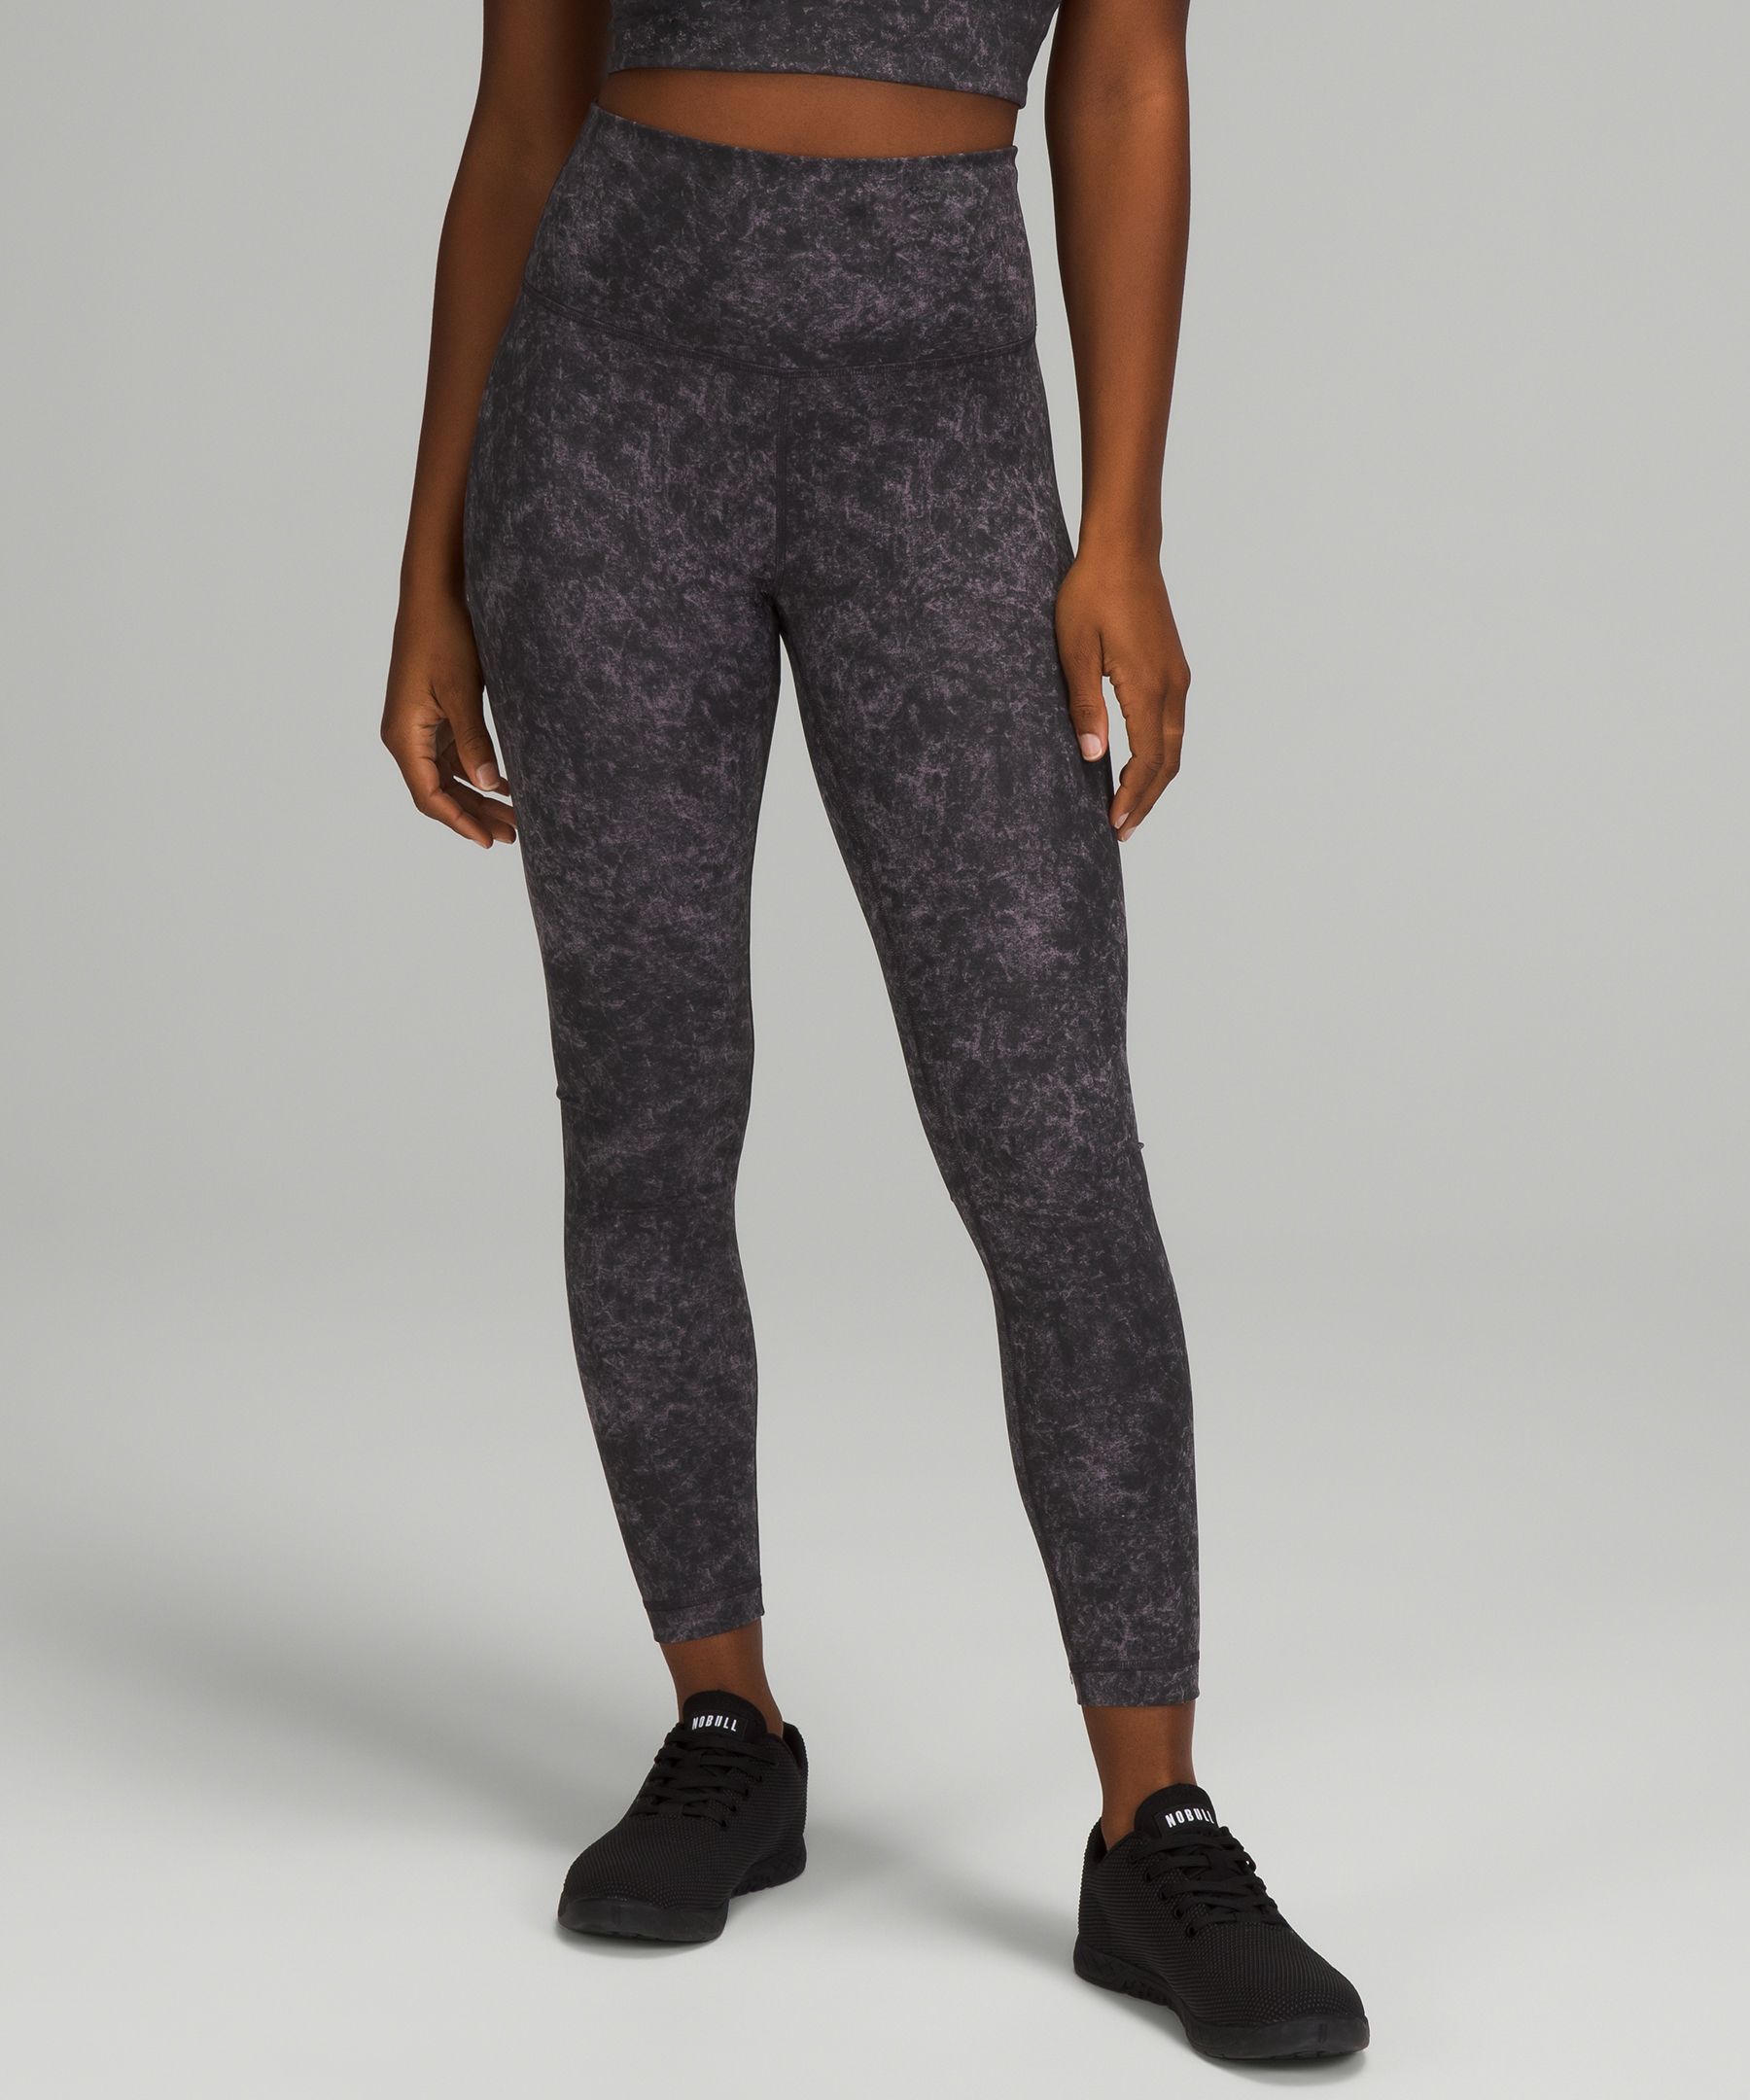 Lululemon Wunder Train High-rise Tights 25" In Gray